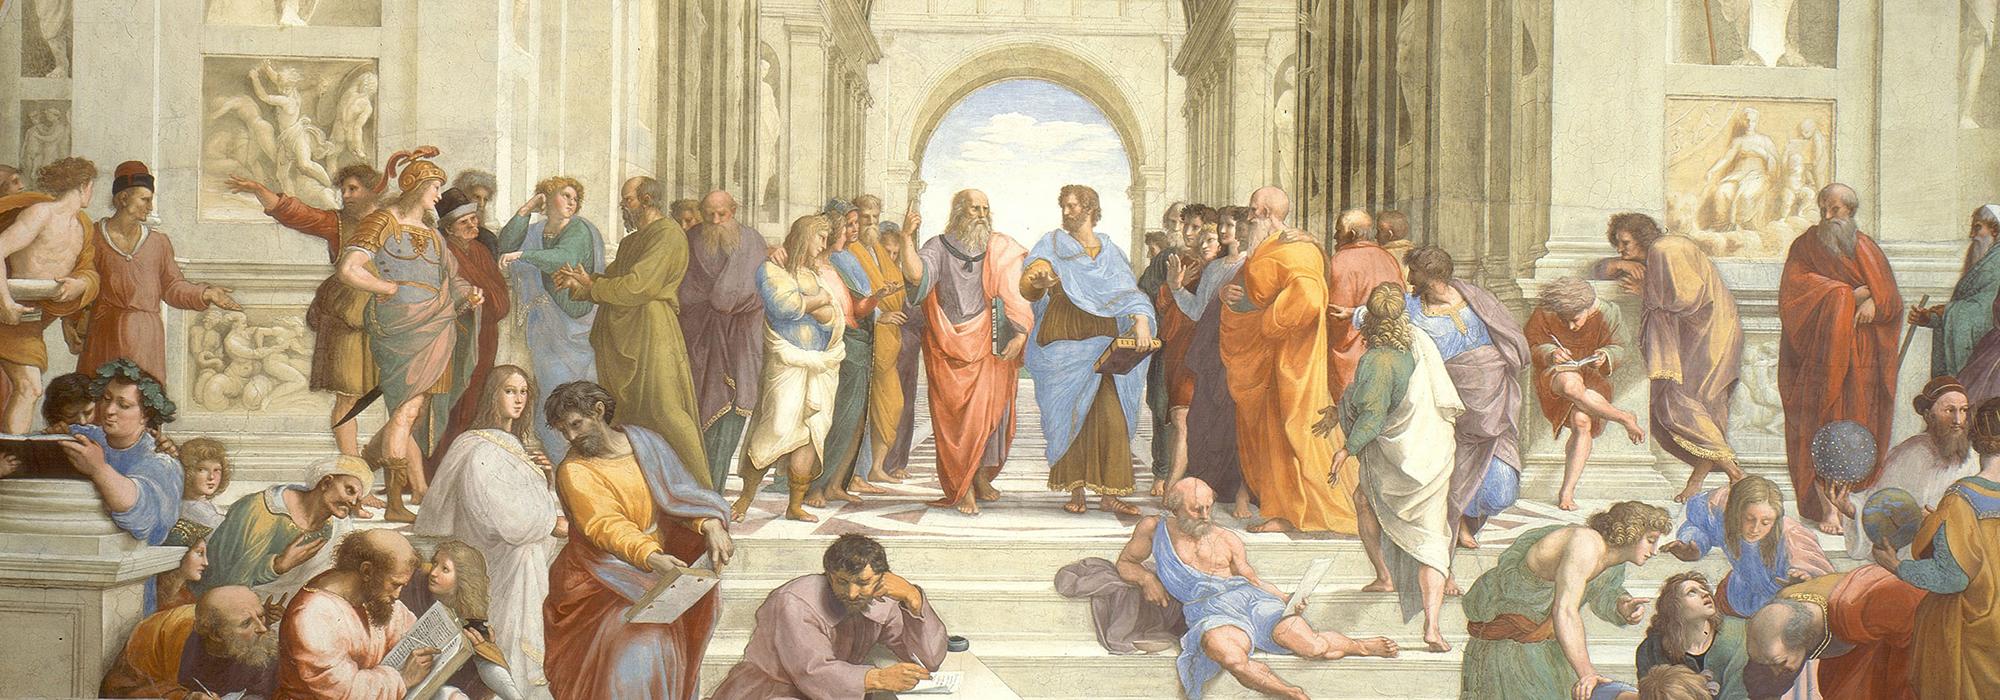 Detail from "The School of Athens" by Raphael 